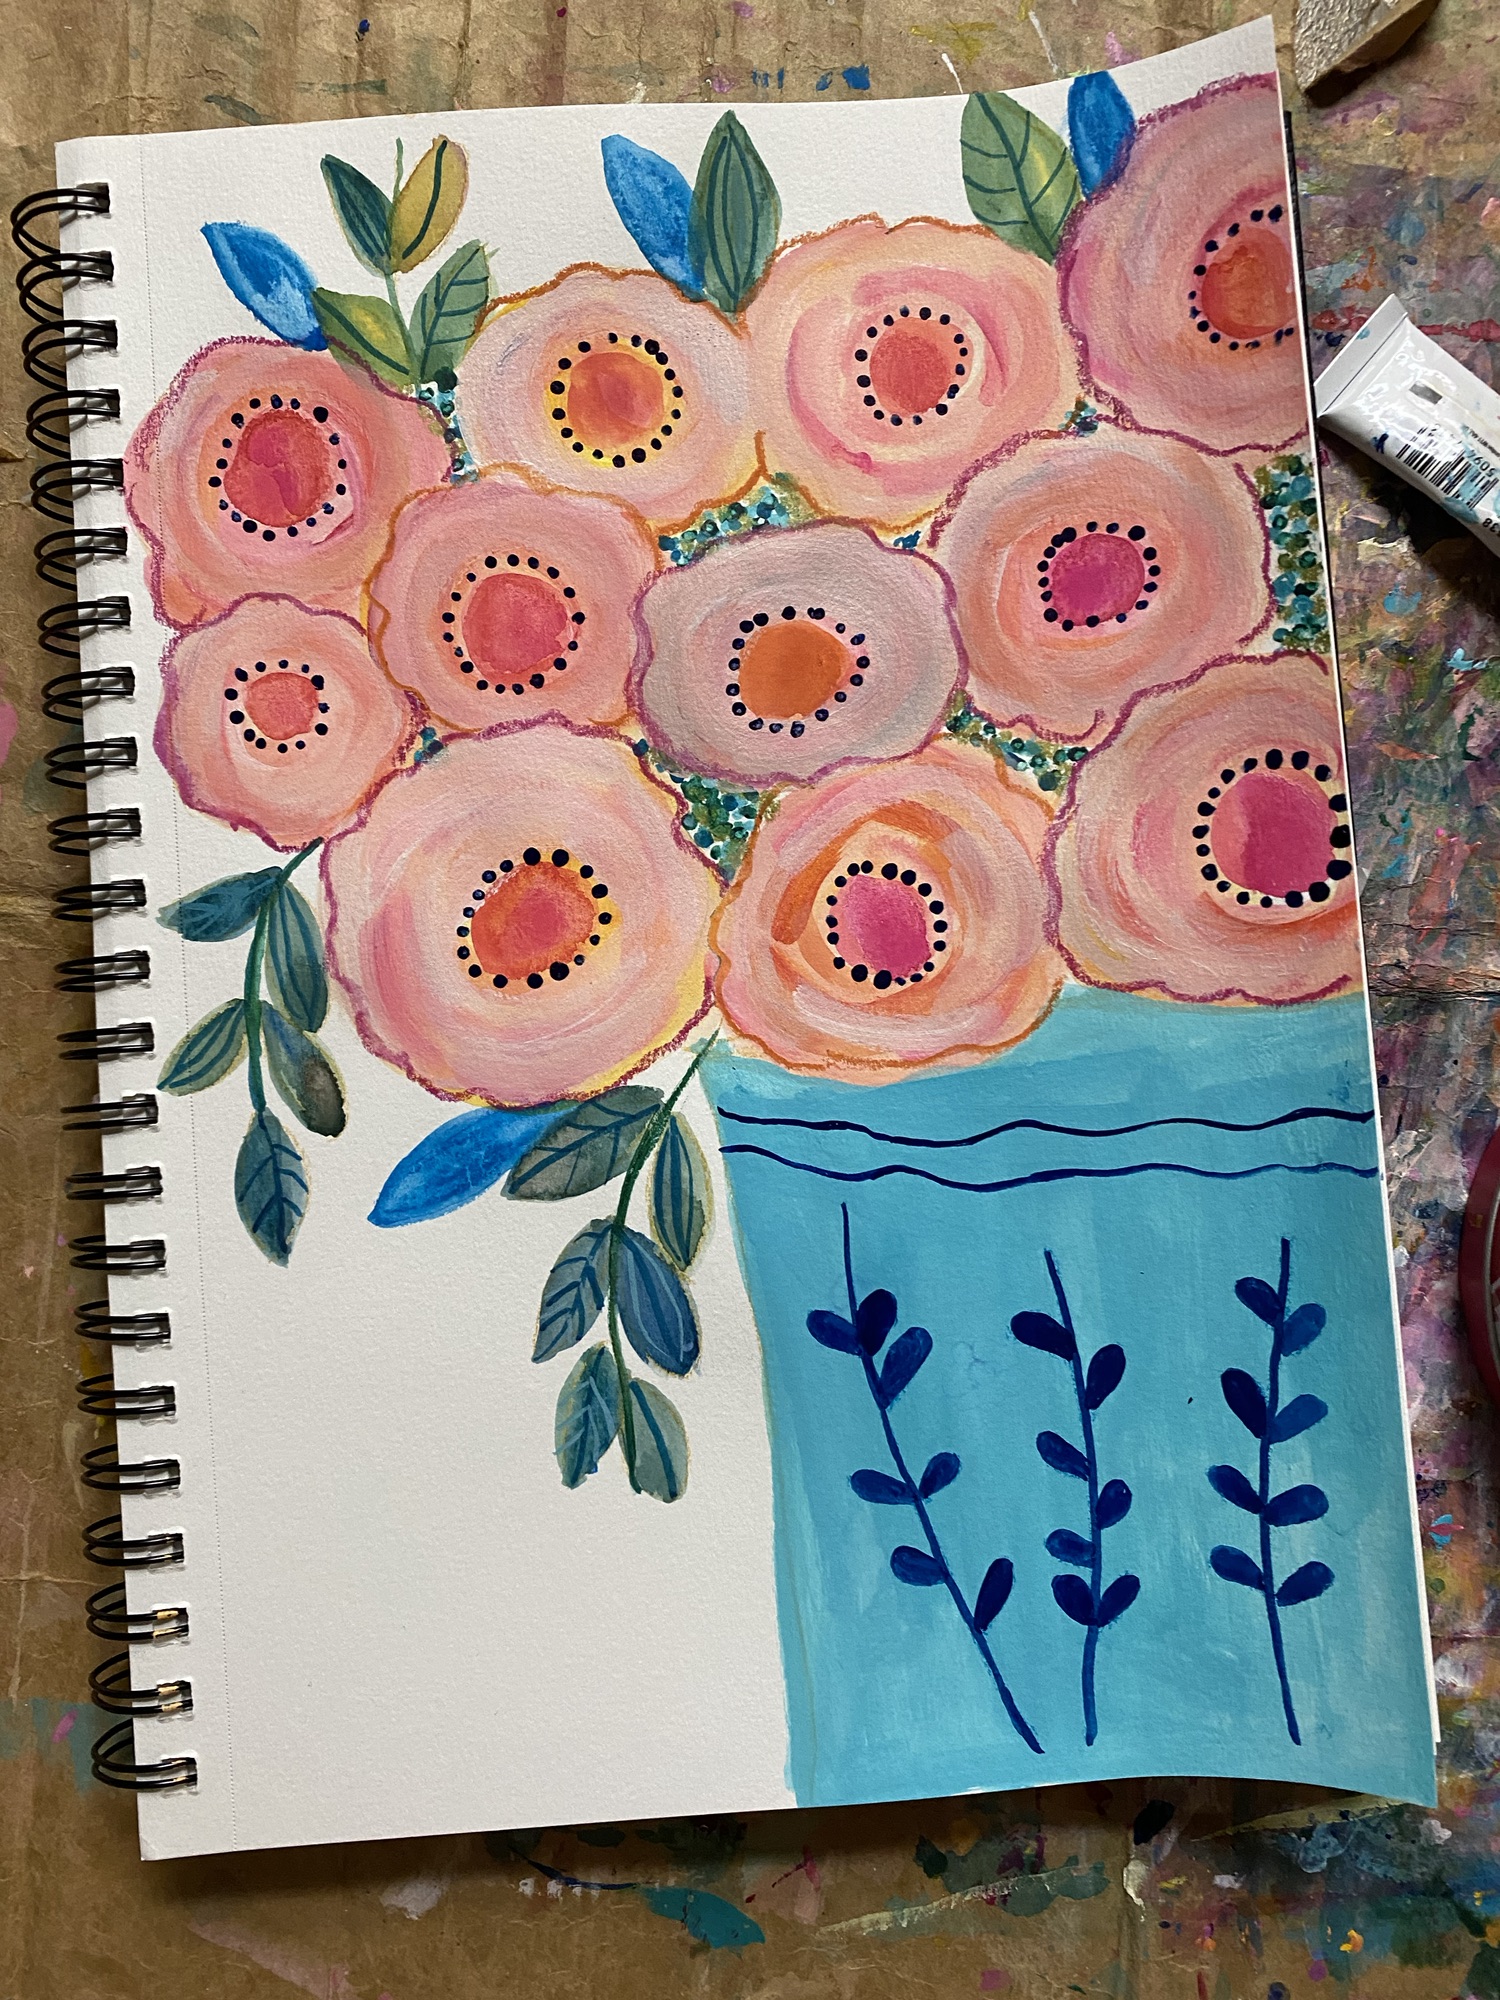 11 pink flowers in a blue leave vase